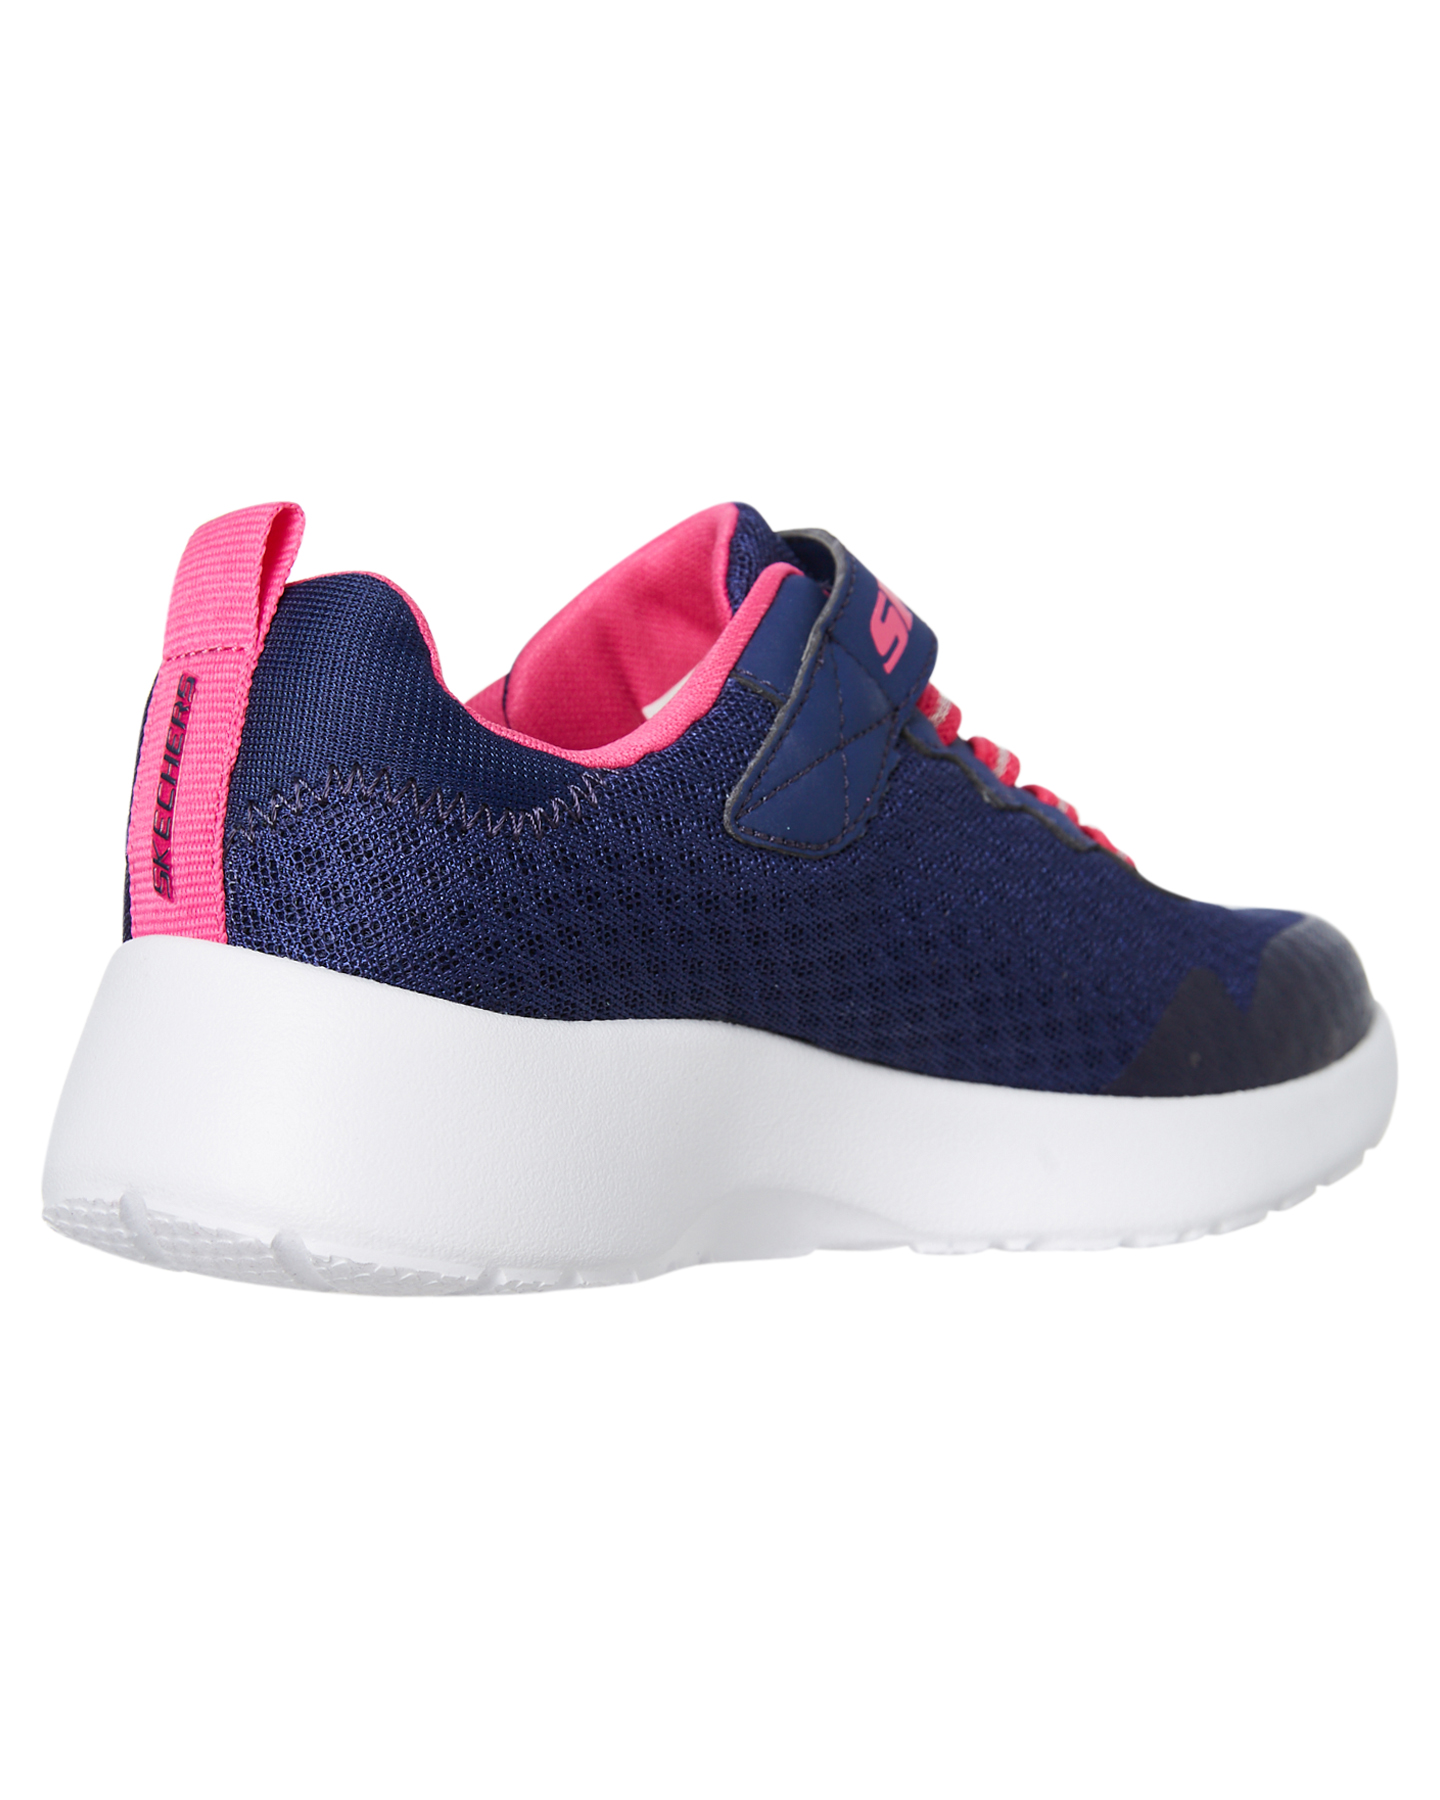 Skechers Girls Dynamight Lead Runner Shoe - Youth - Navy | SurfStitch